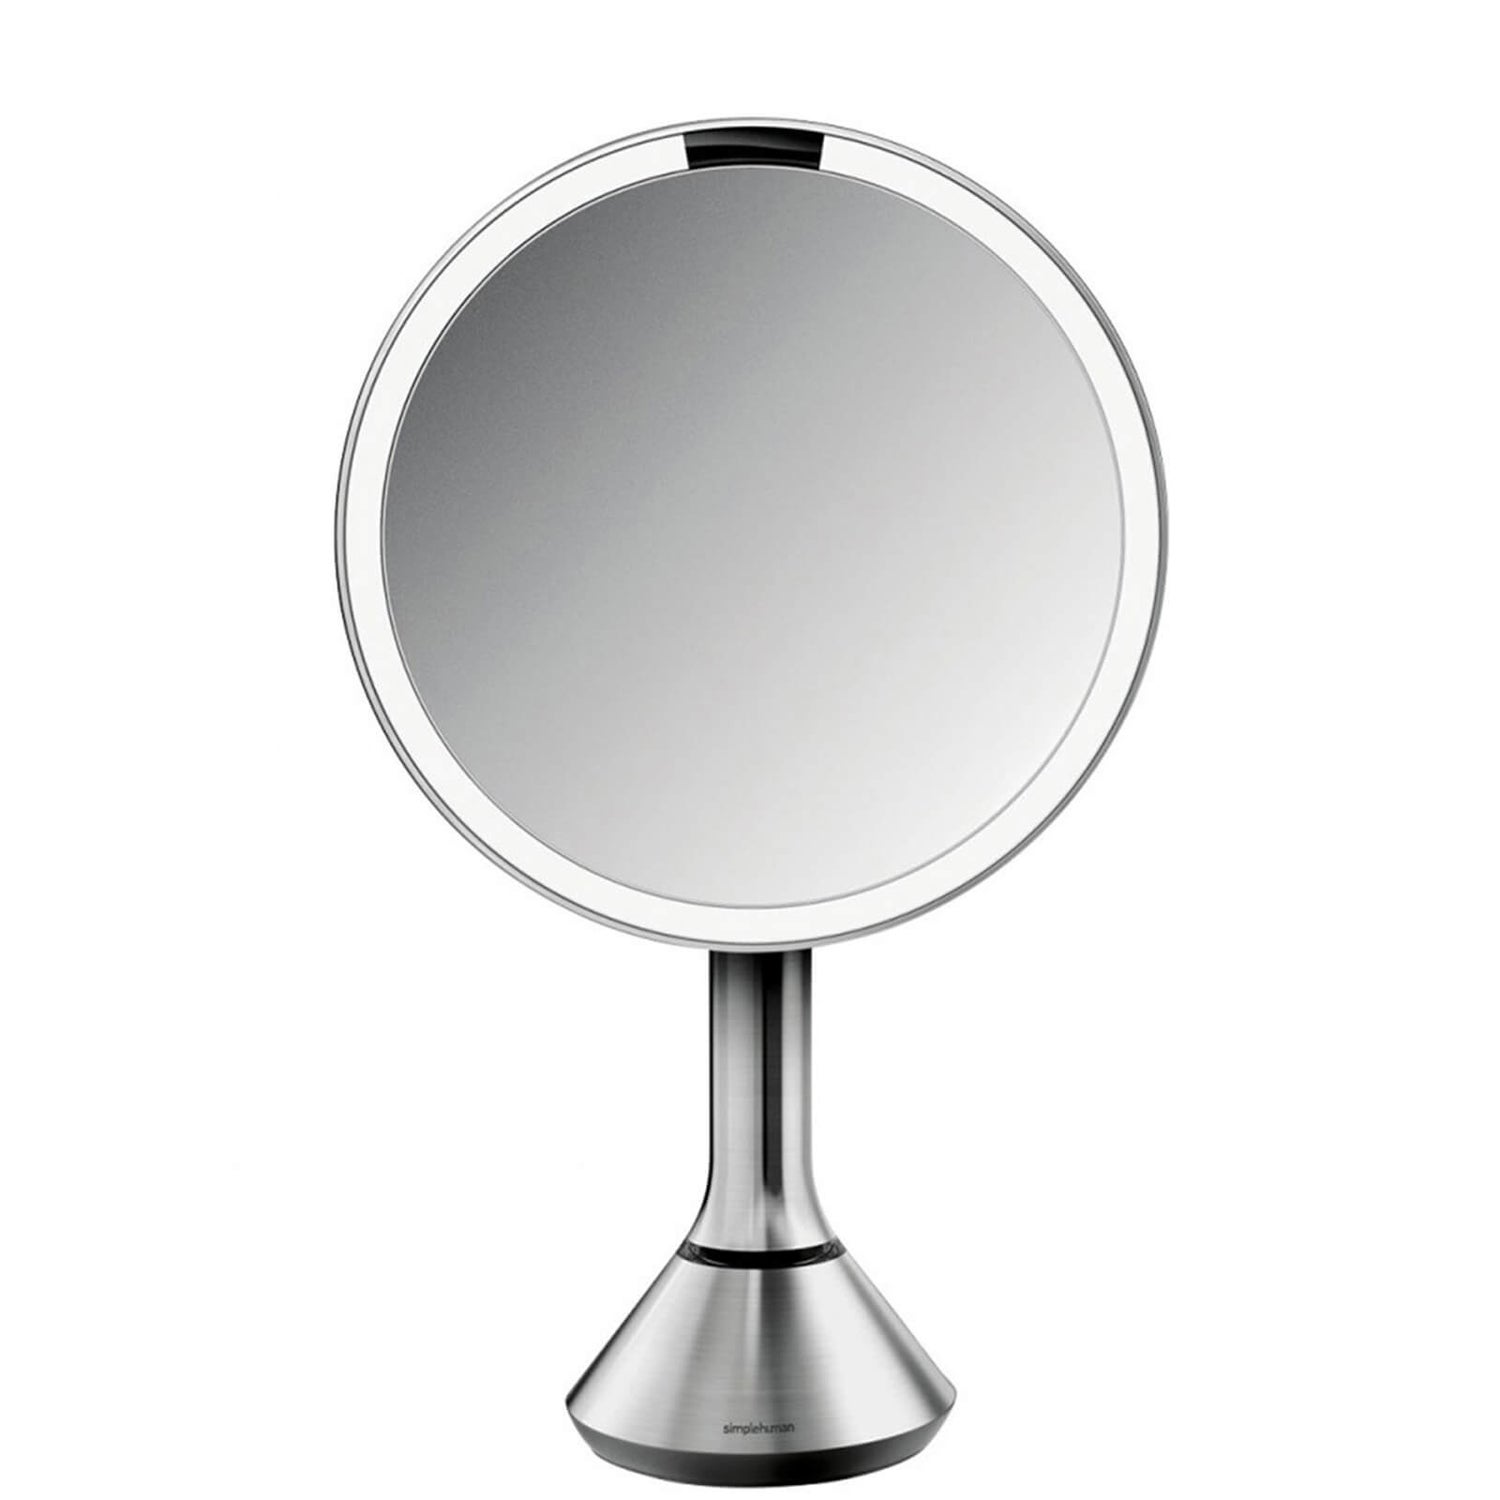 simplehuman Sensor Mirror 8 Inches With Touch-Control Brightness